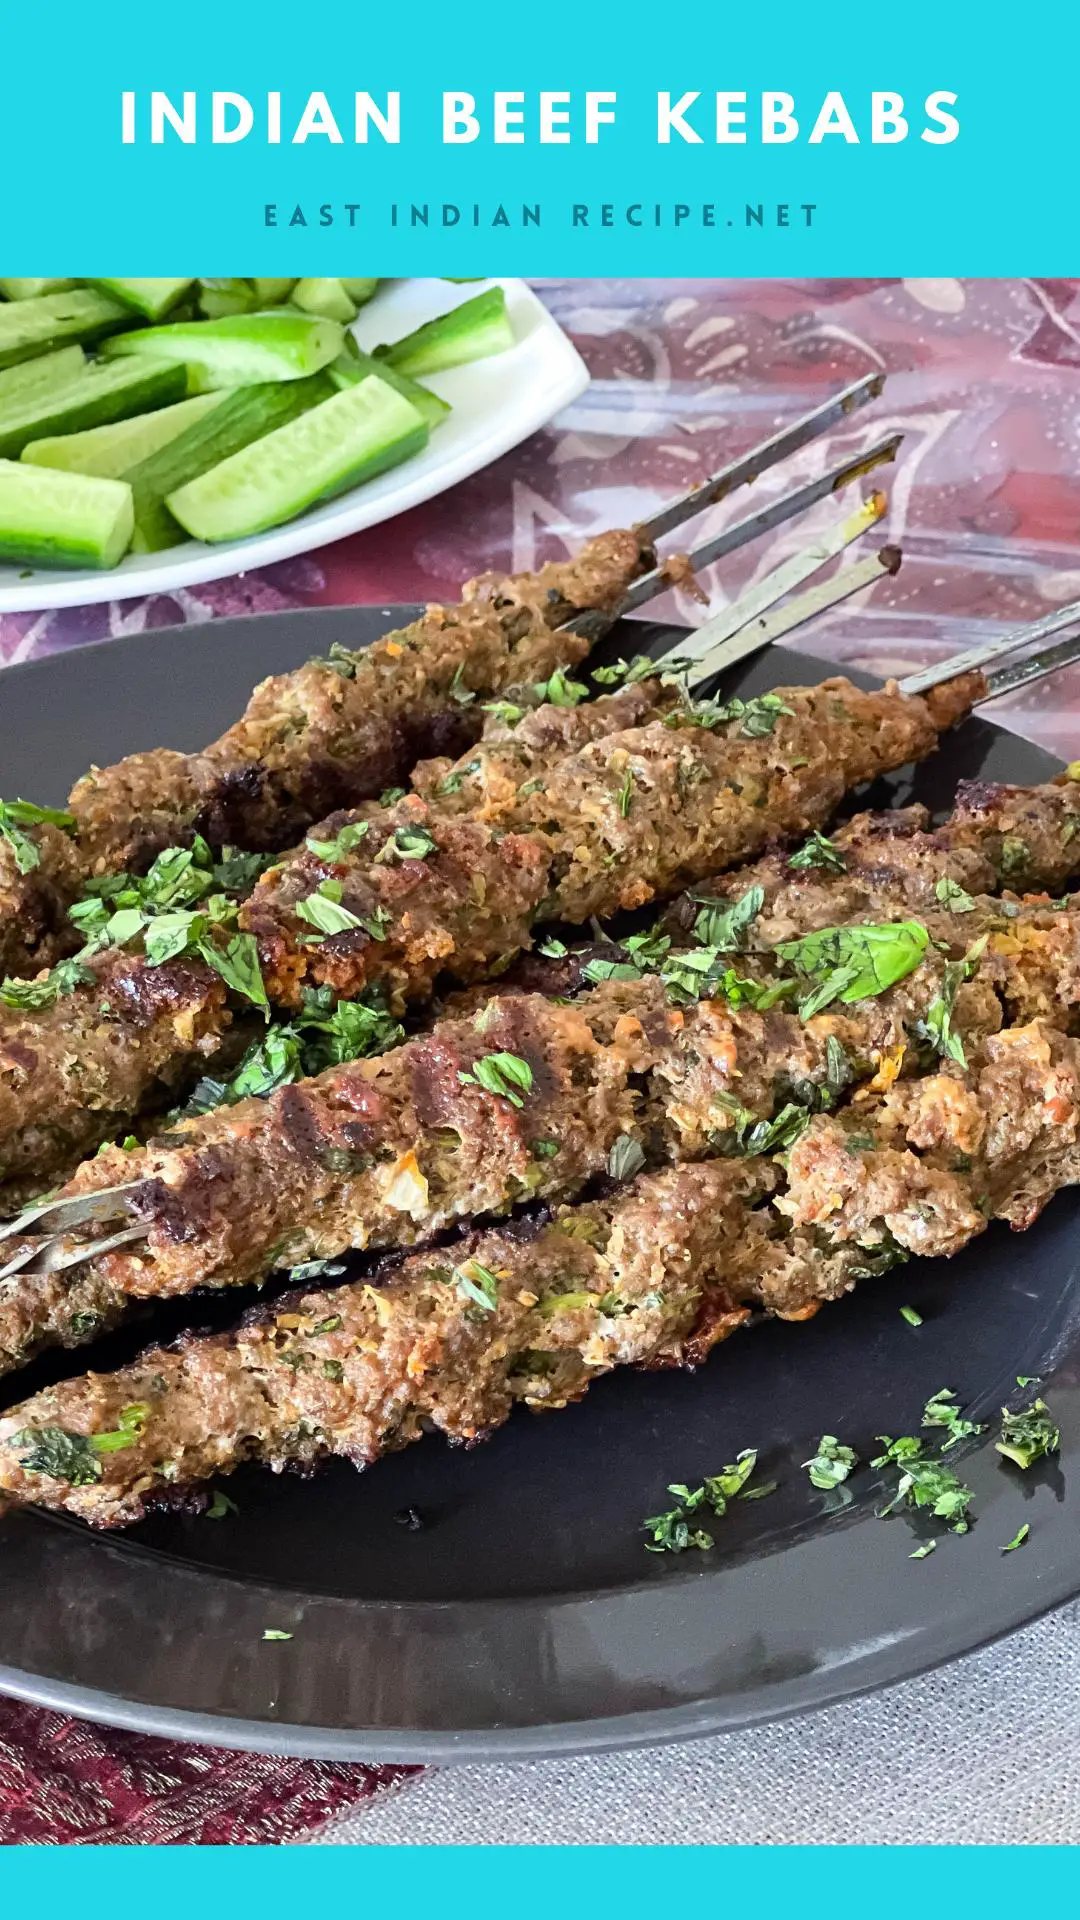 Pinterest image - plate with ground beef kebabs.